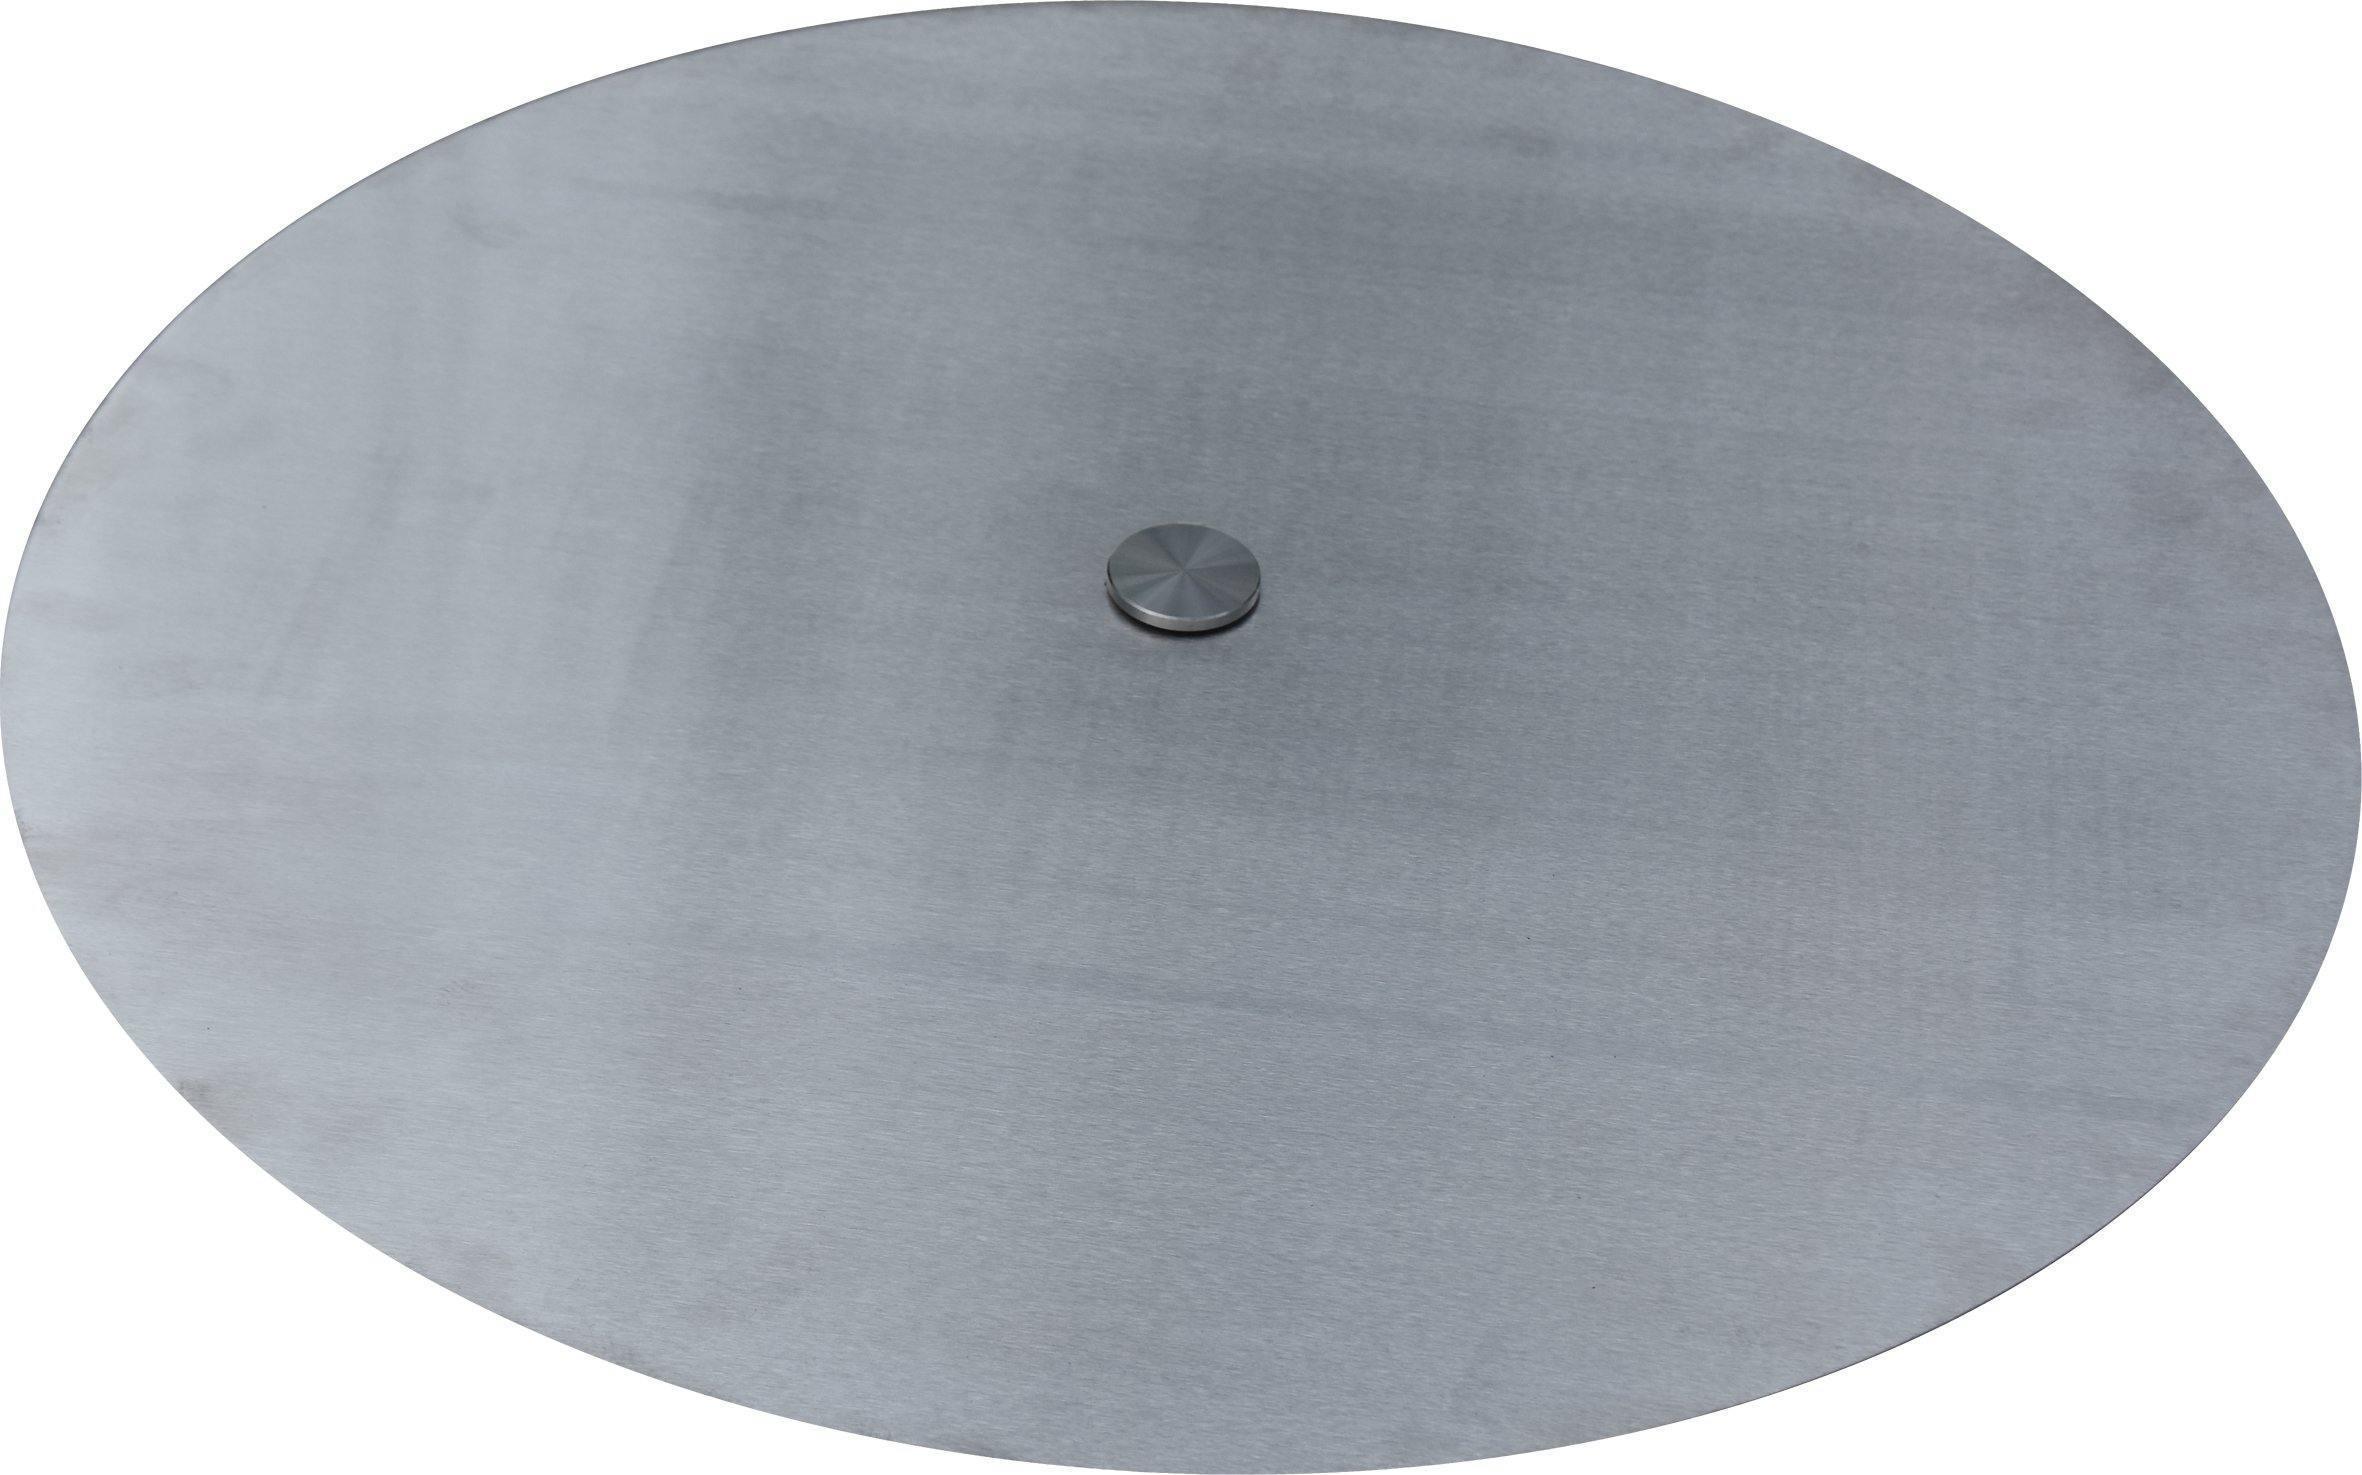 Stainless Steel Lid - Large Round 29" - Dti Direct USA